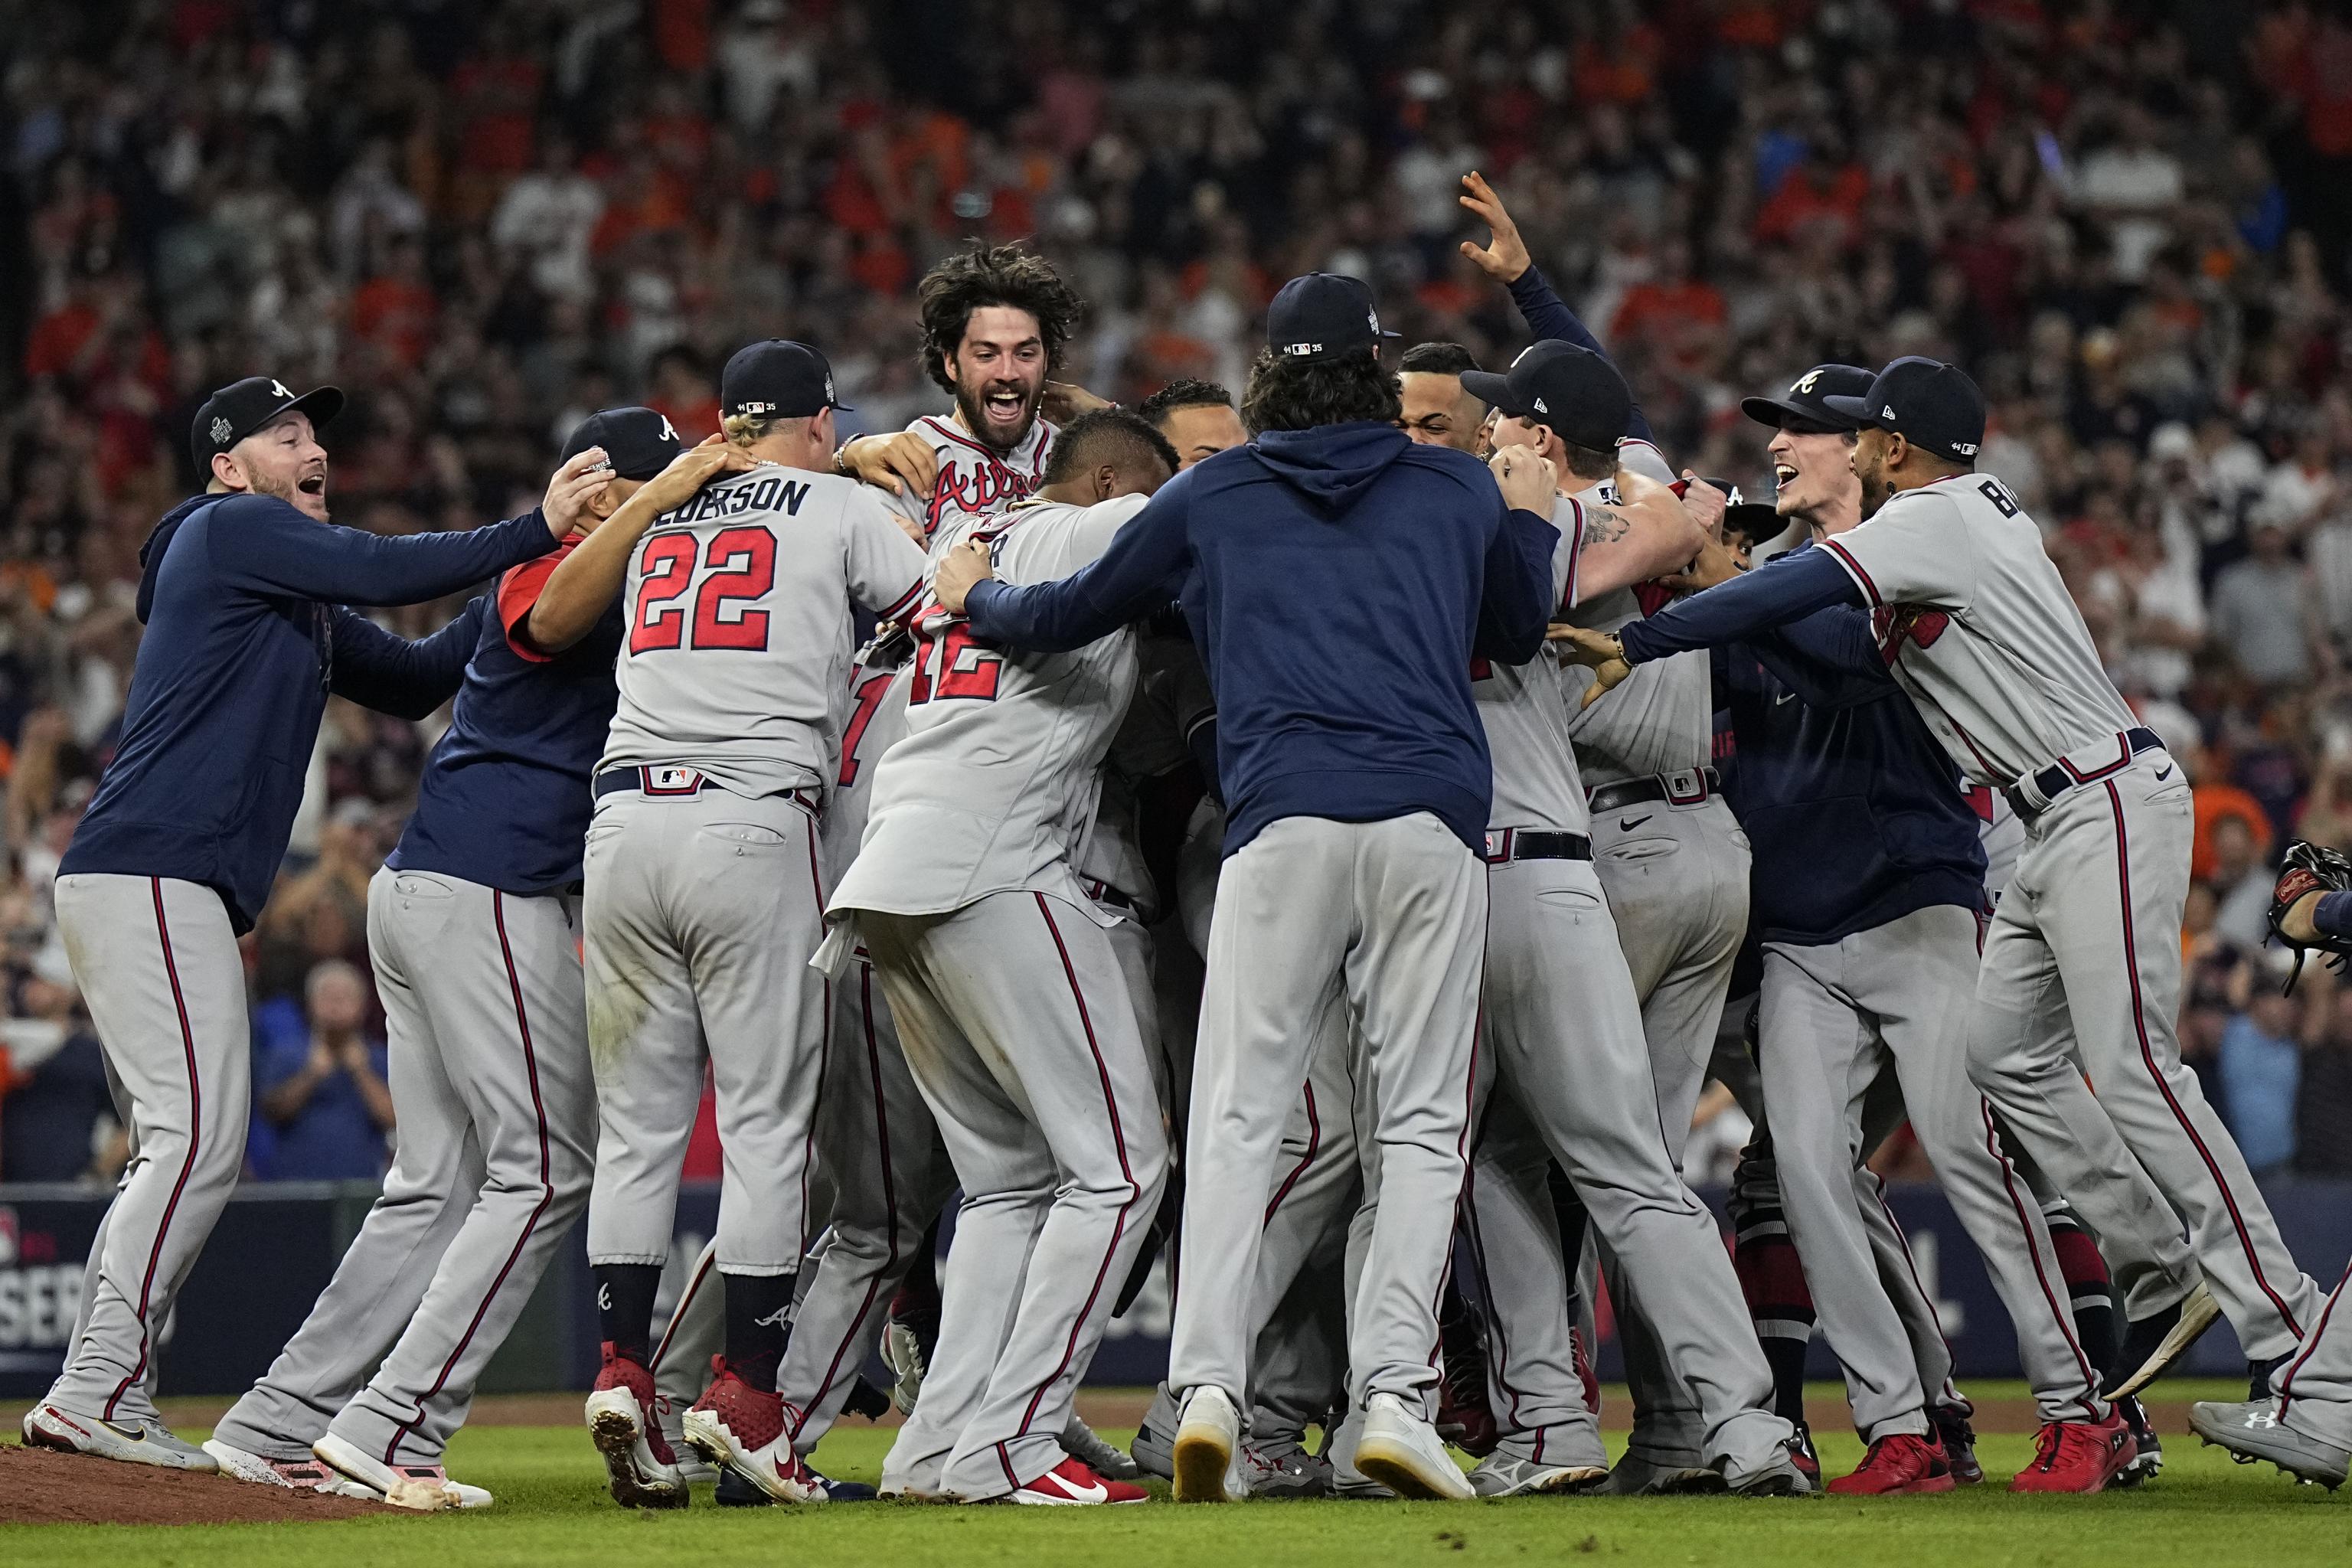 2021 World Series Preview